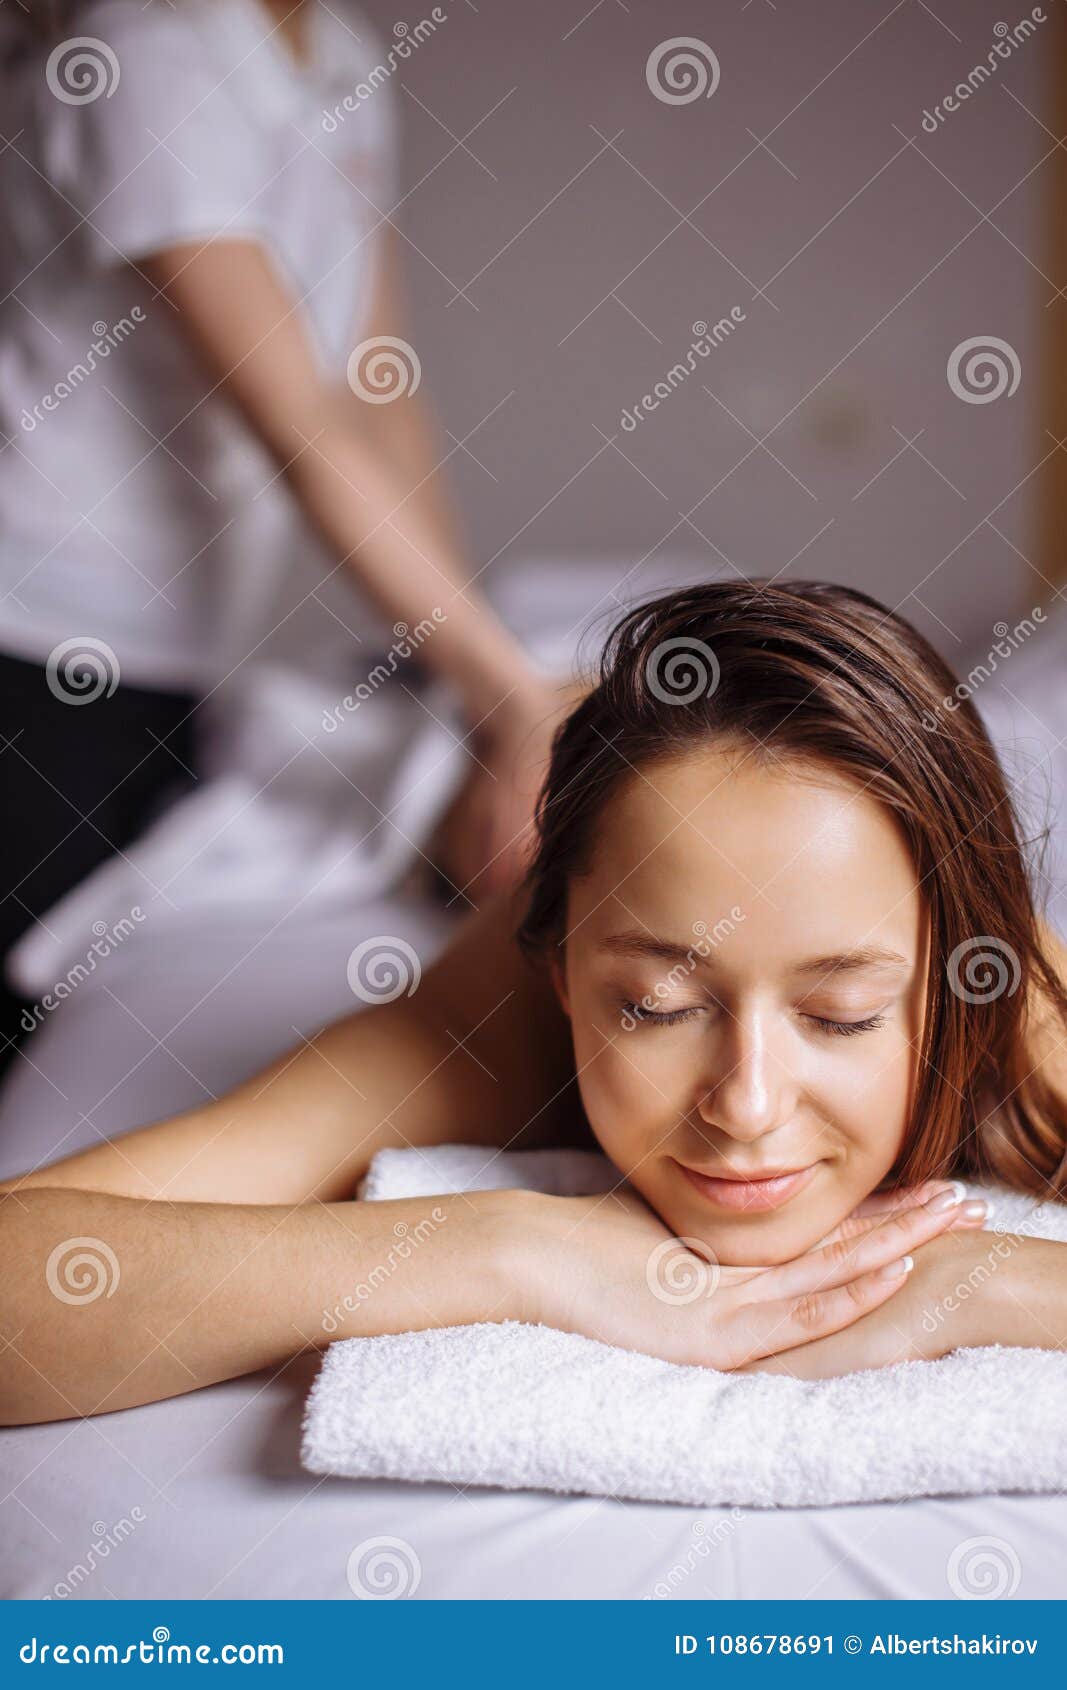 Beautiful Woman Receiving A Relaxing Back Massage At Spa Stock Image Image Of Happy People